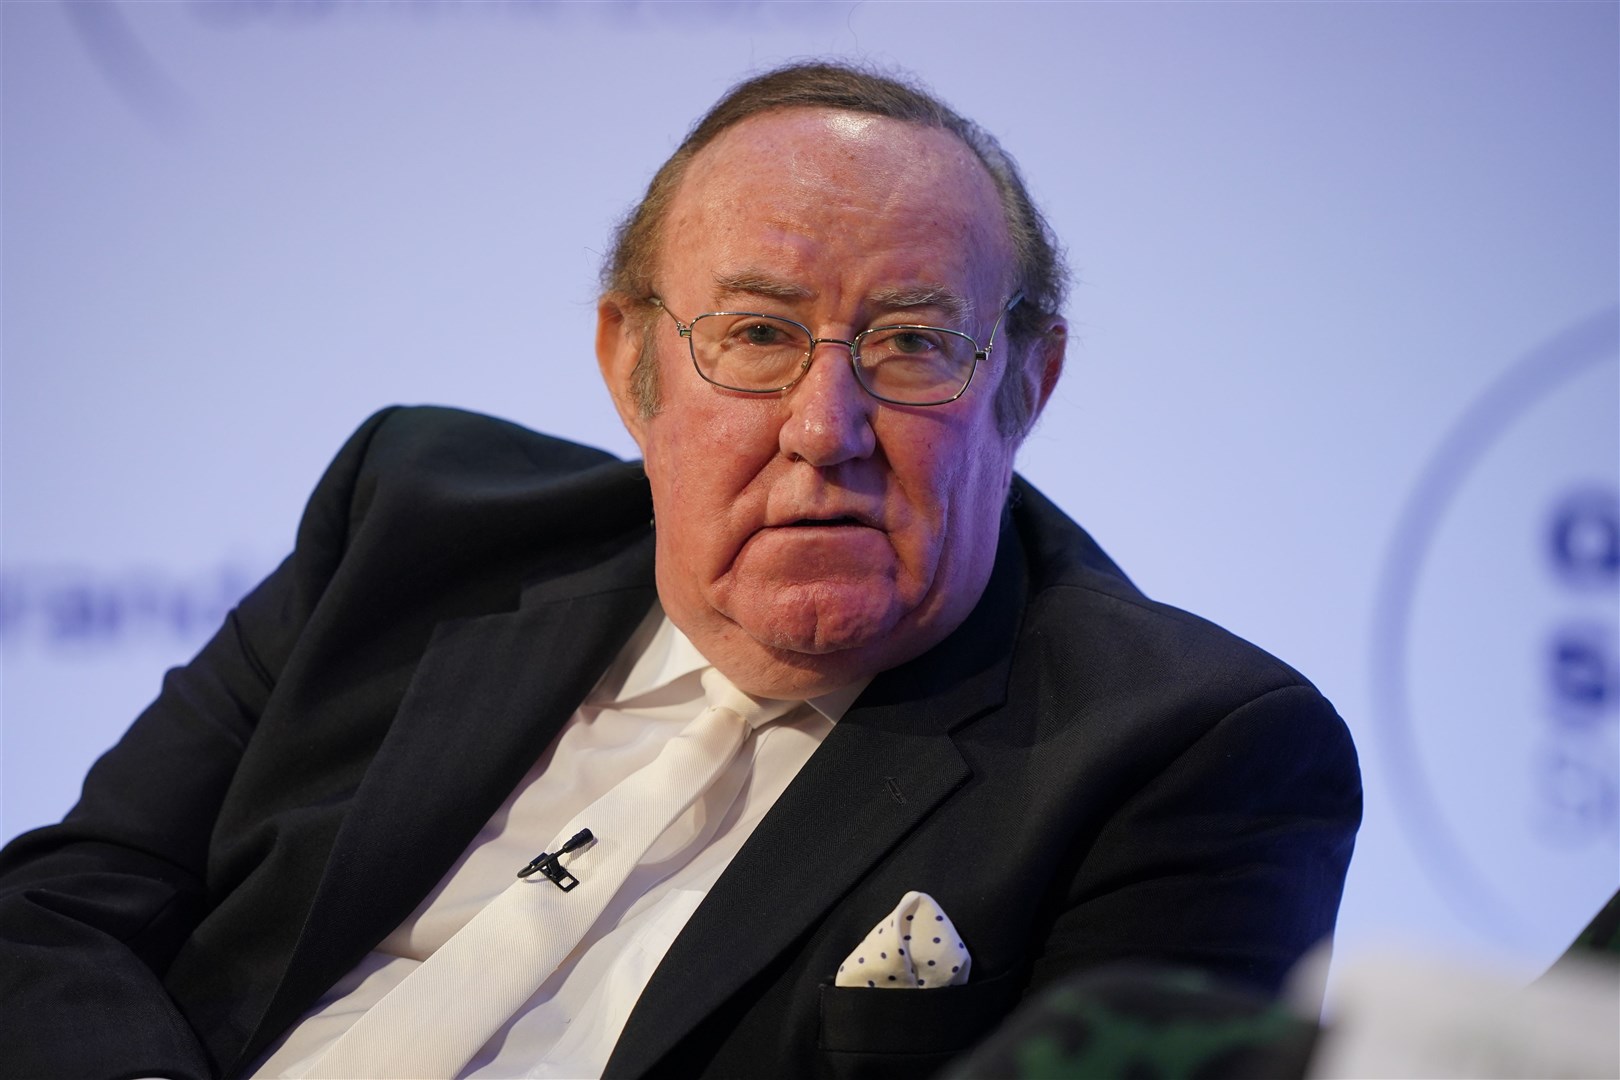 Former GB News chairman Andrew Neil said Ofcom needs to grow a backbone and quick” over the issue of politicians hosting TV programmes (Jonathan Brady/PA)